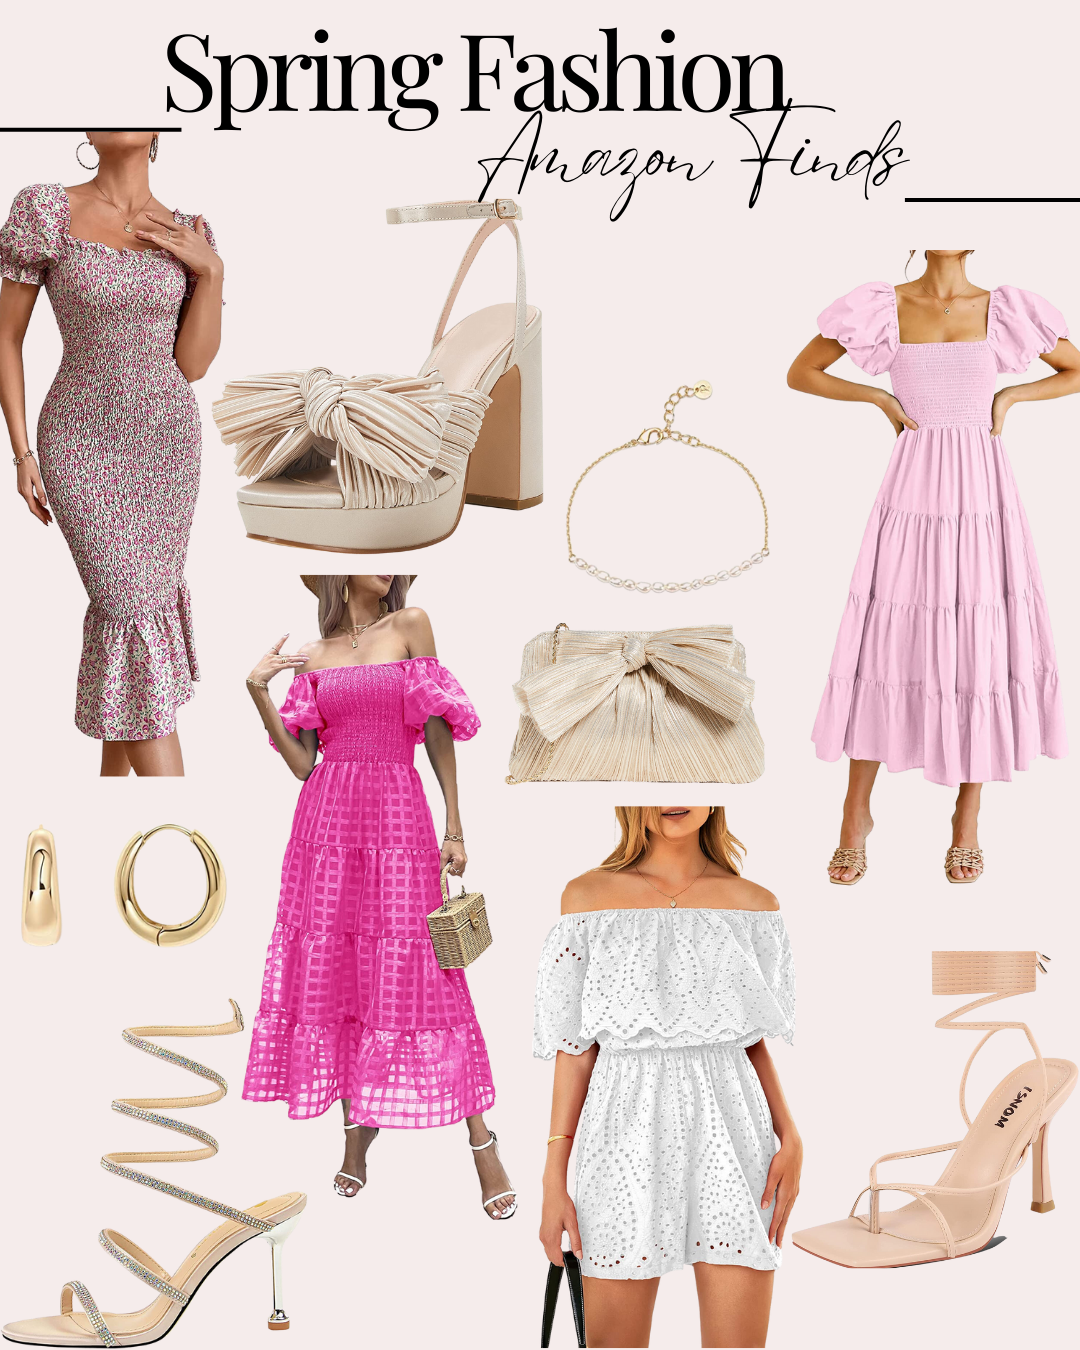 Spring fashion from amazon dresses and rompers in pink